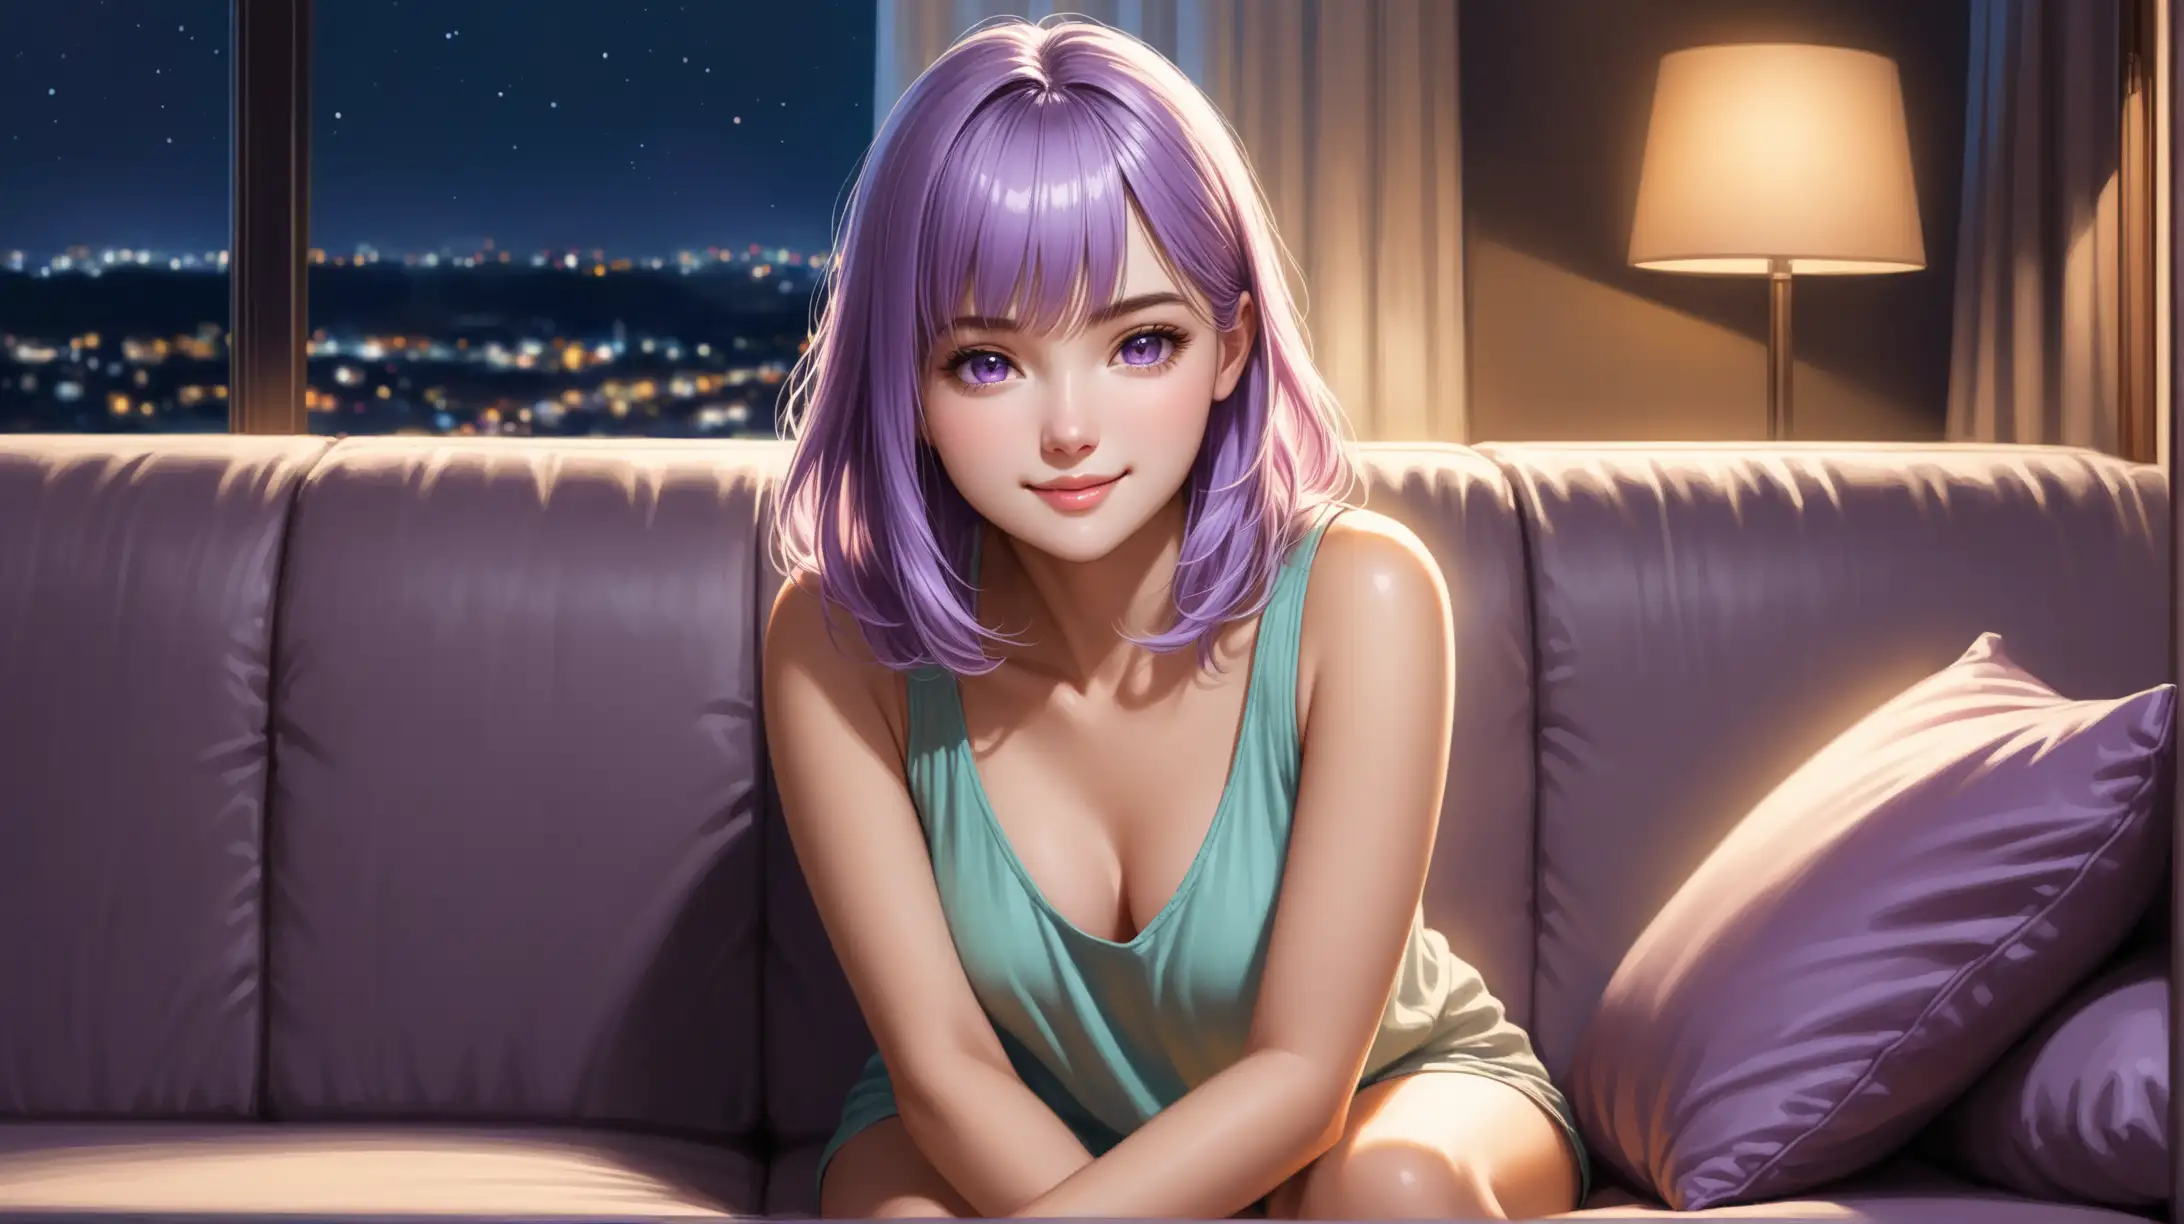 Seductive Woman with ShoulderLength Light Purple Hair Sitting Indoors at Night